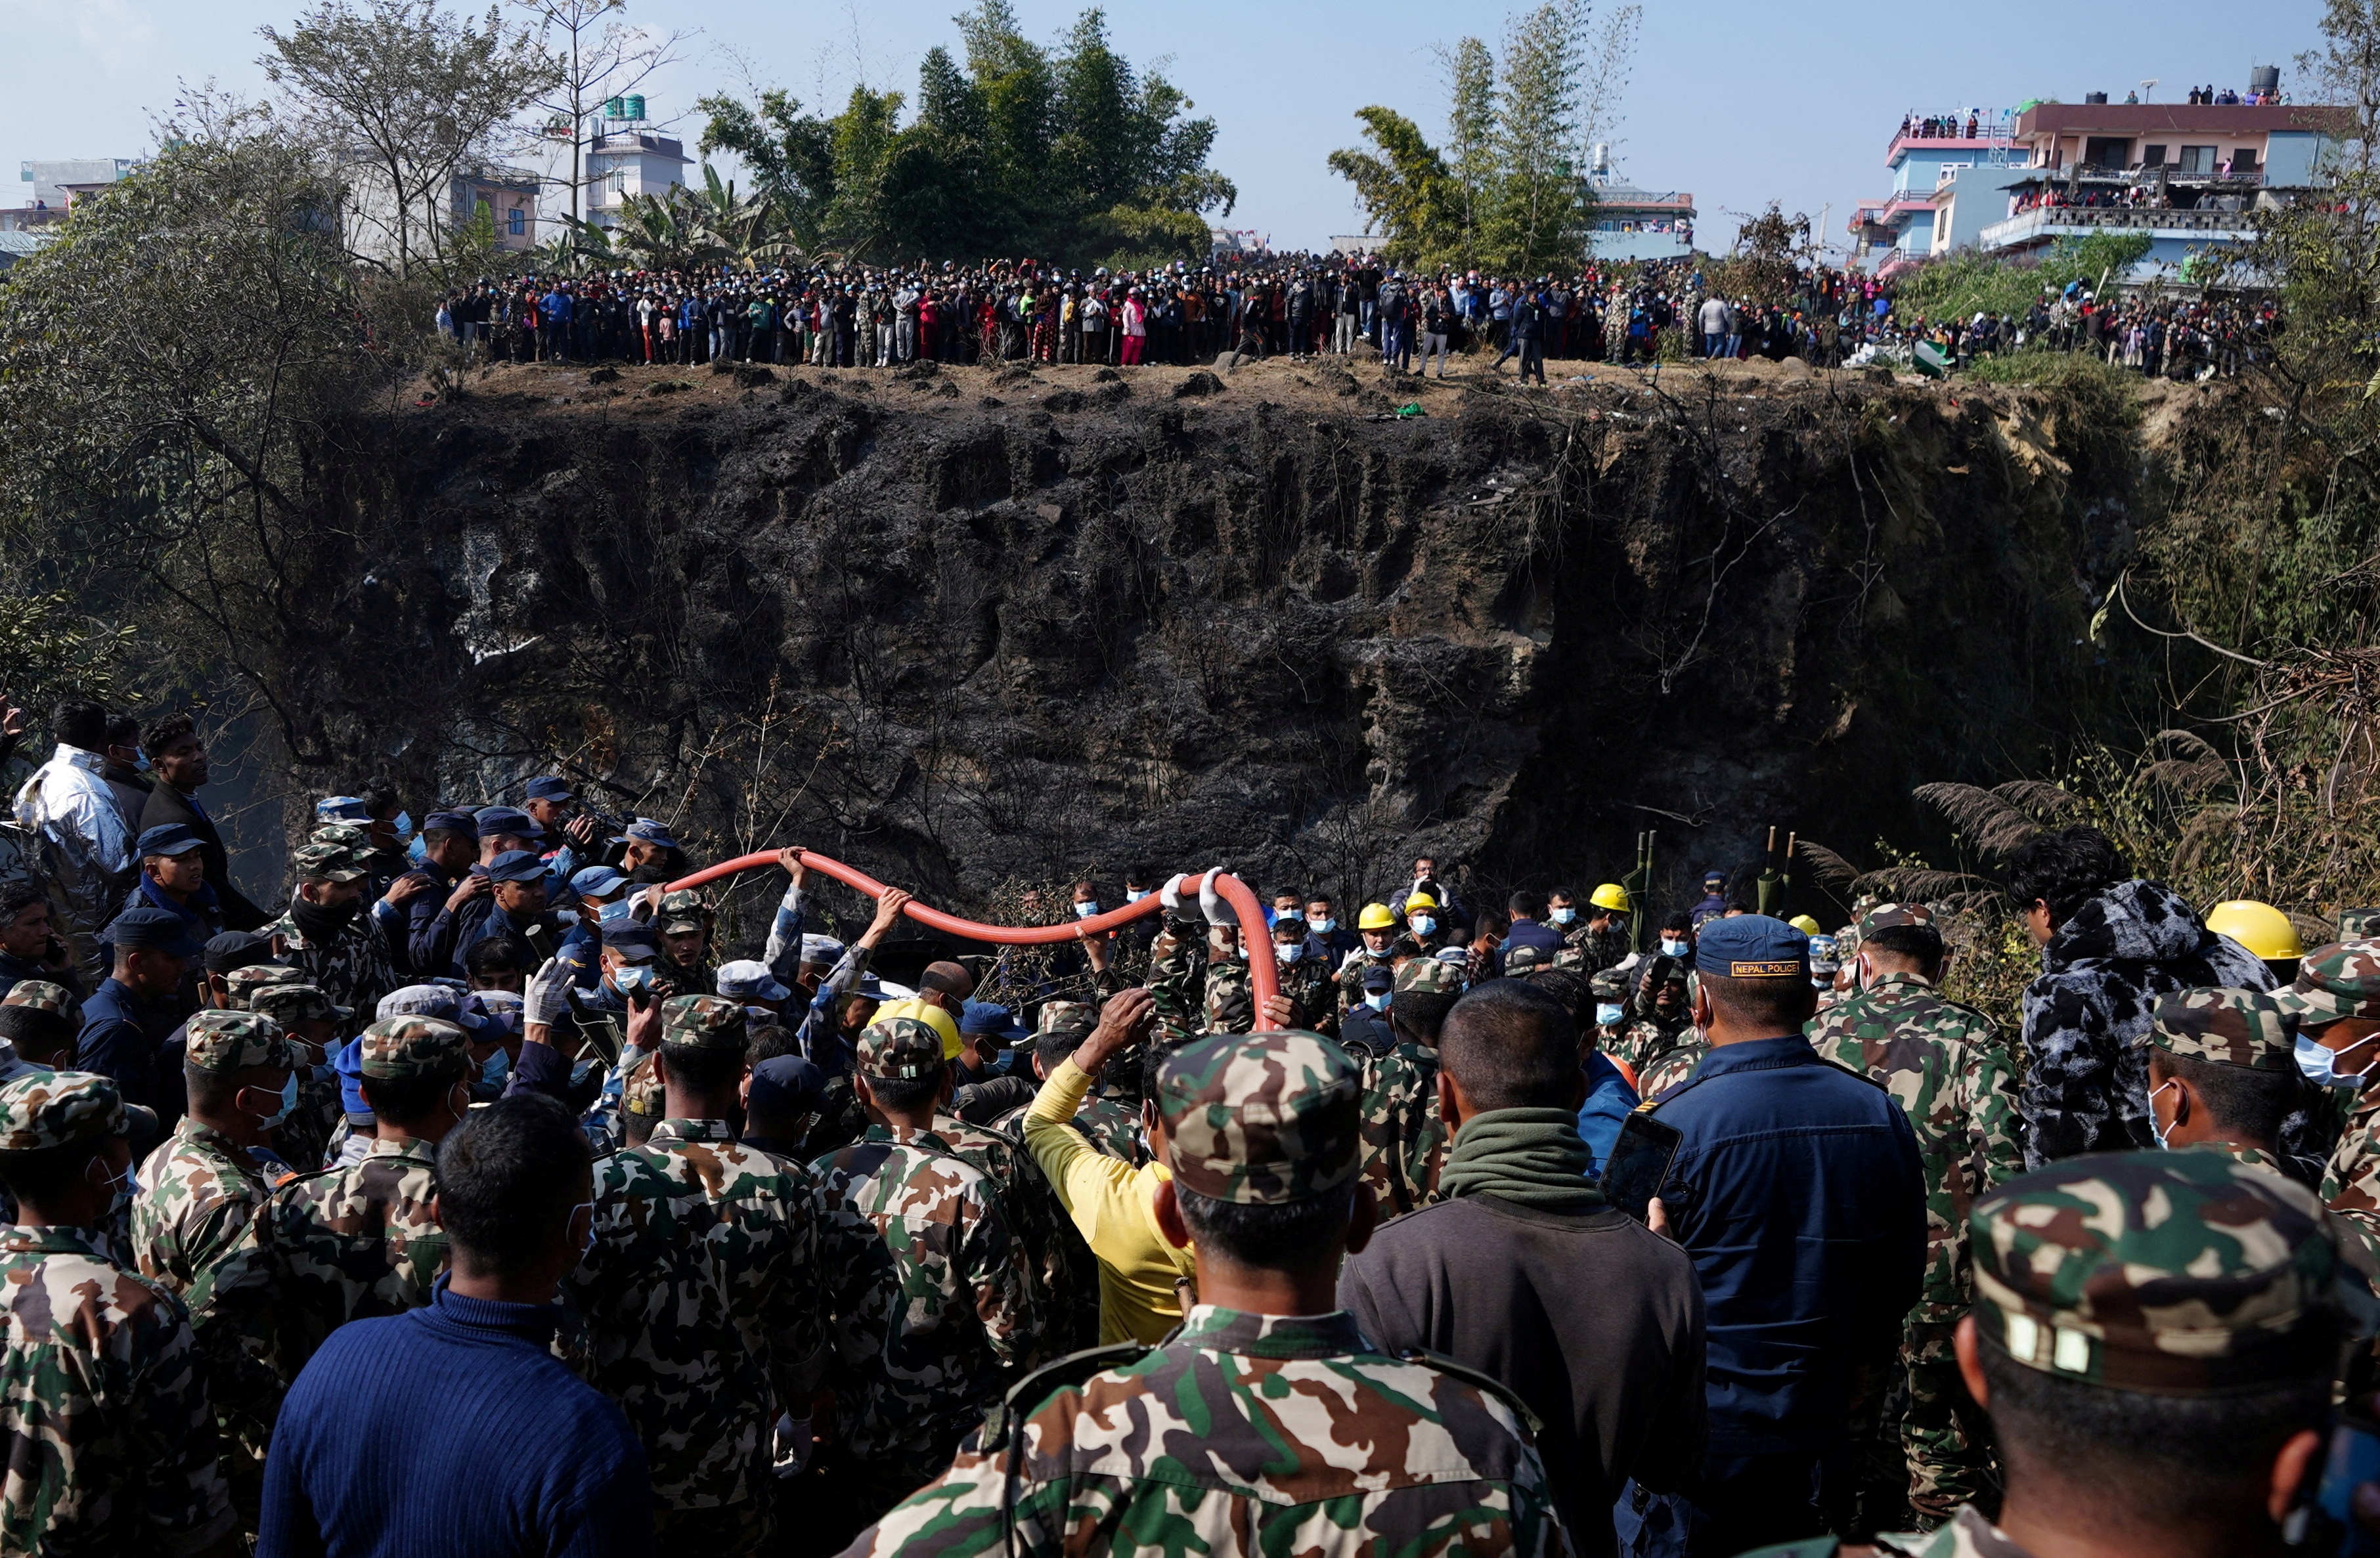 Crowds gather as rescue teams work to retrieve bodies at the crash site of an aircraft carrying 72 people in Pokhara. (Reuters)